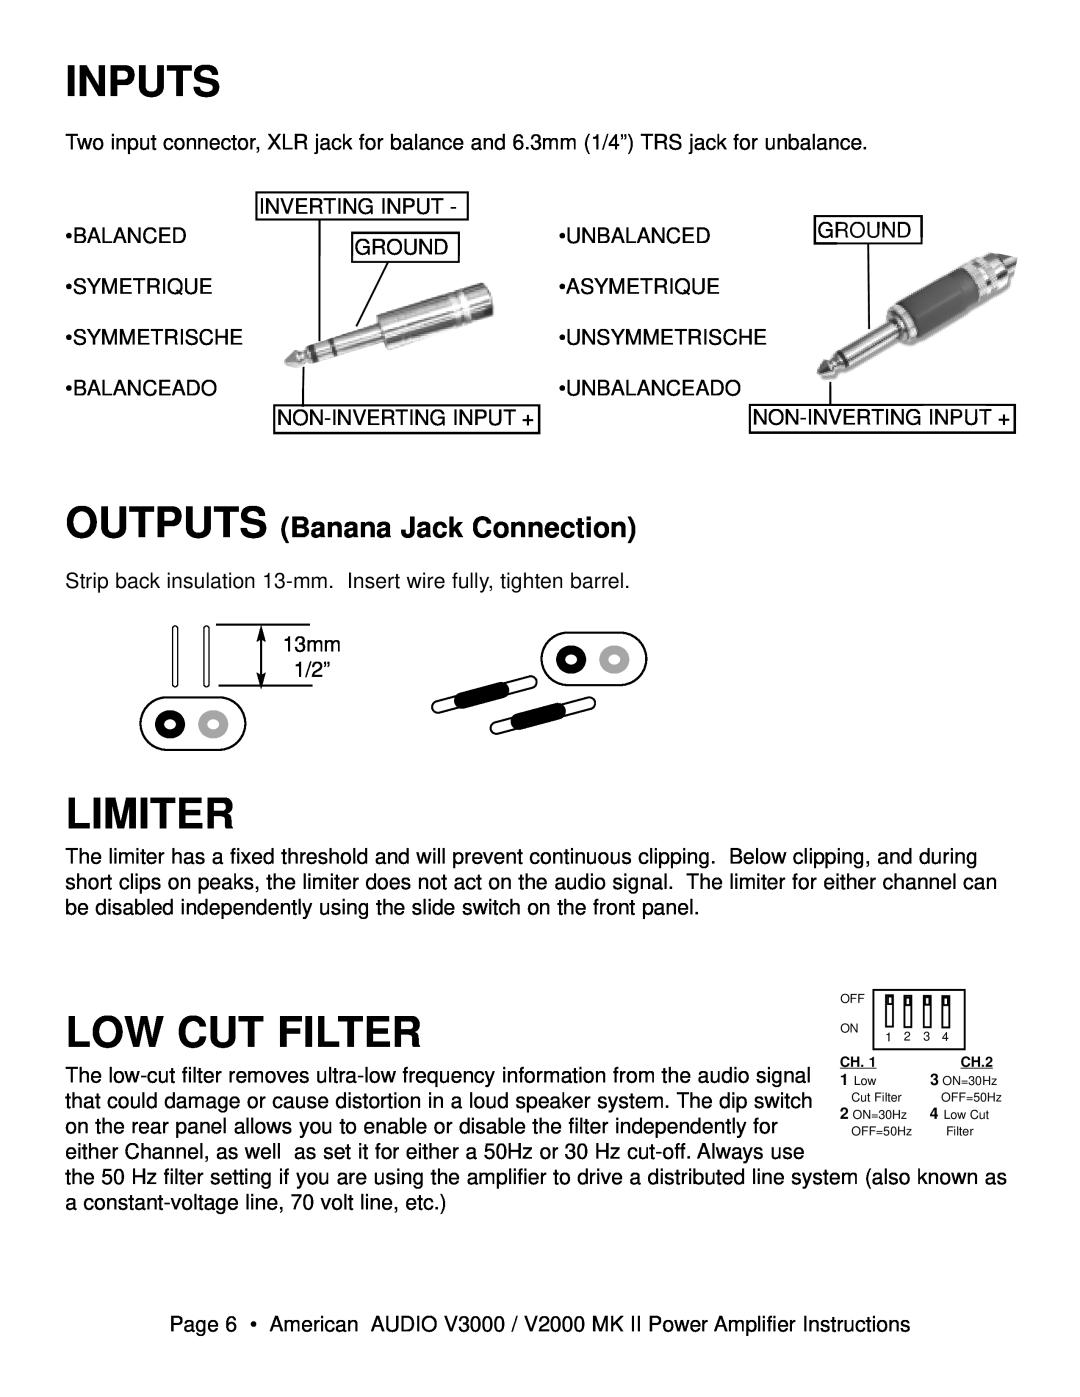 American Audio V3000/V2000 manual Inputs, Limiter, Low Cut Filter, OUTPUTS Banana Jack Connection 